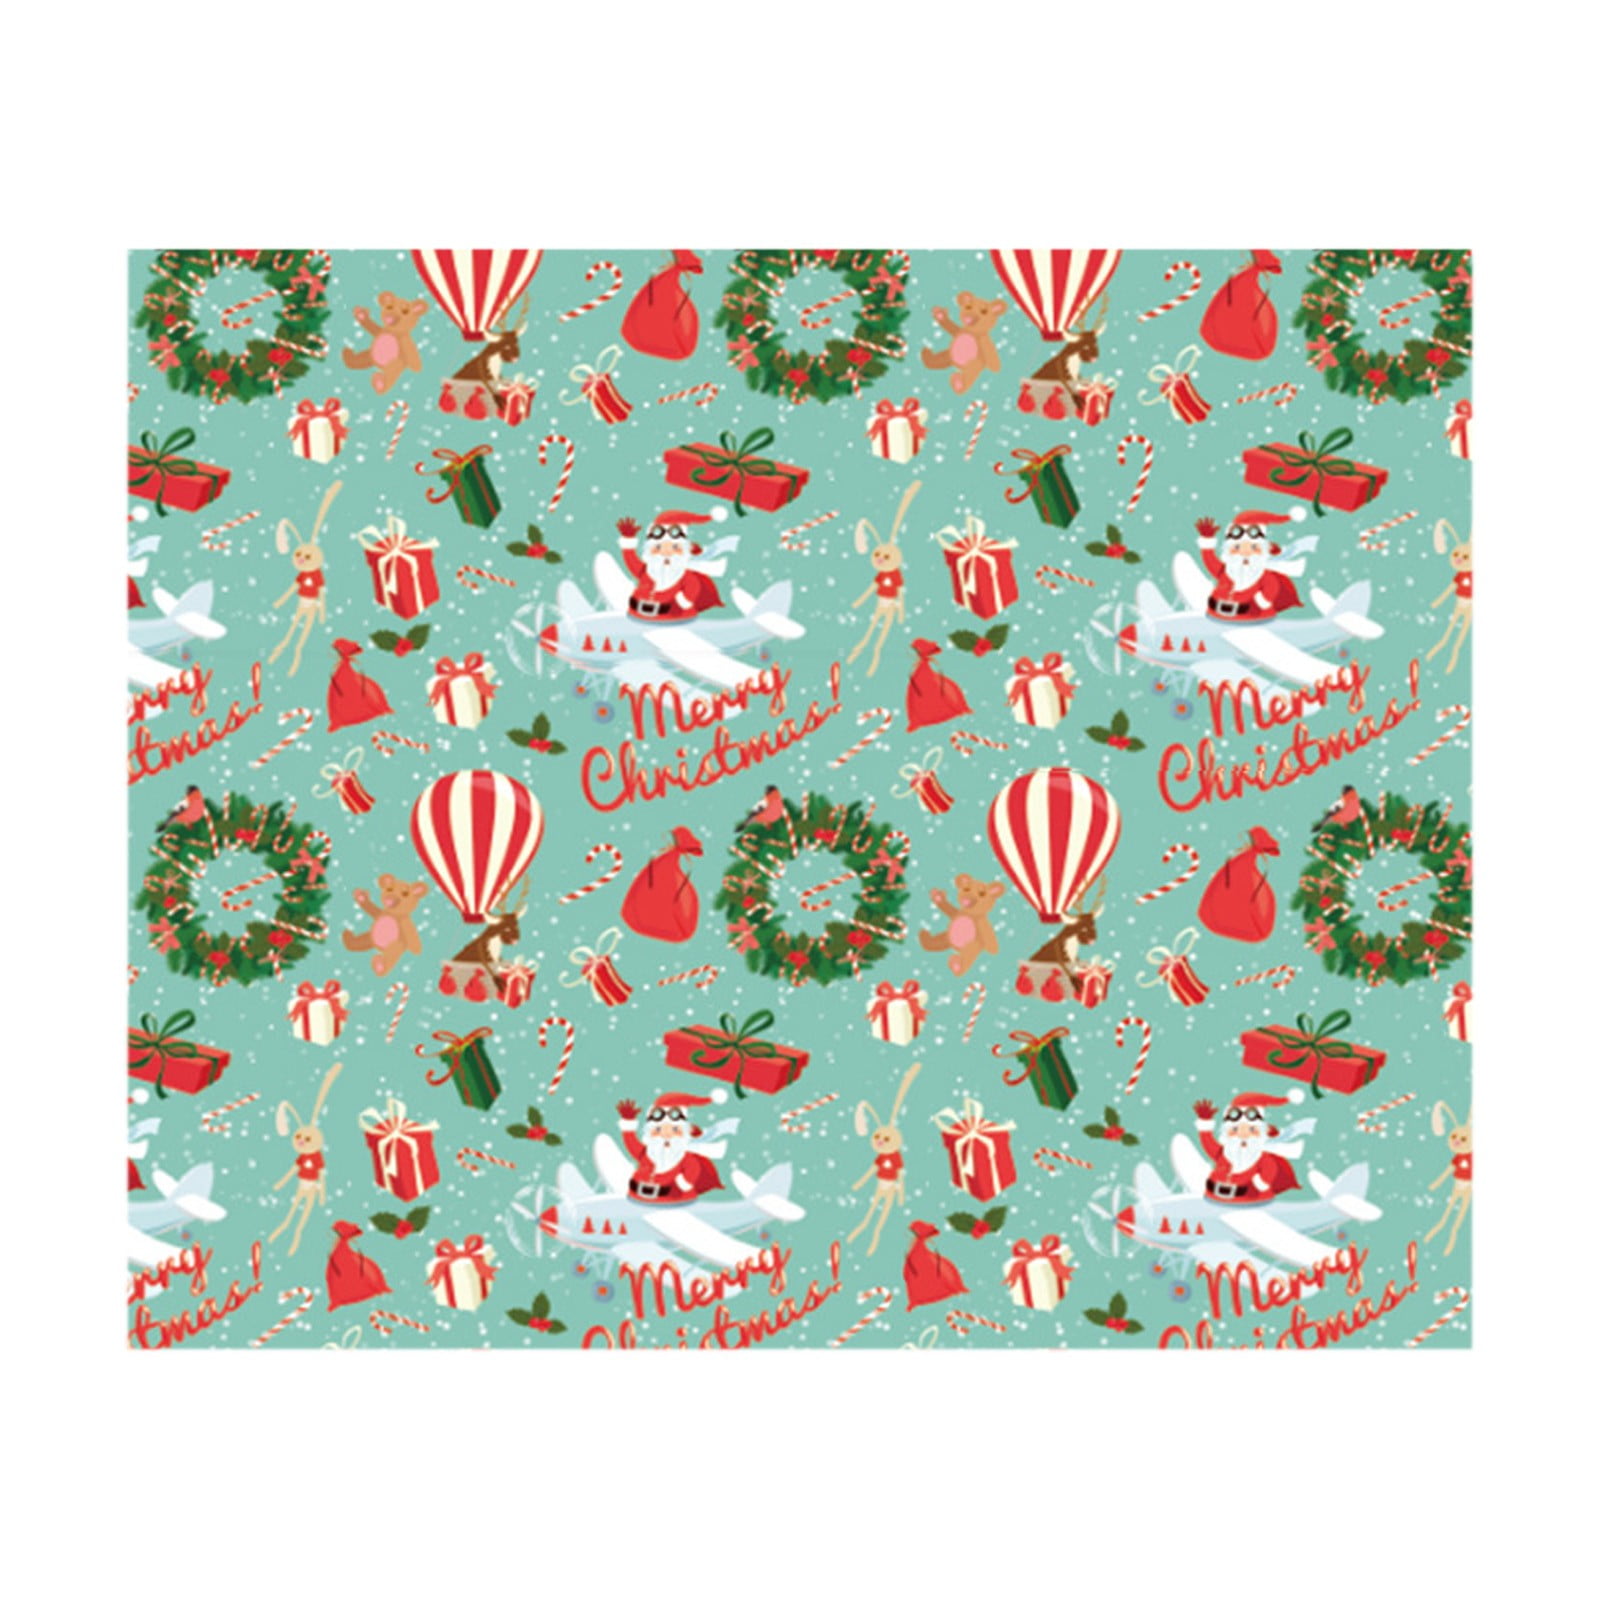 American Greetings Christmas Reversible Wrapping Paper, Red, Green,  Christmas Icons (4-Rolls, 120 Total Sq. ft.)